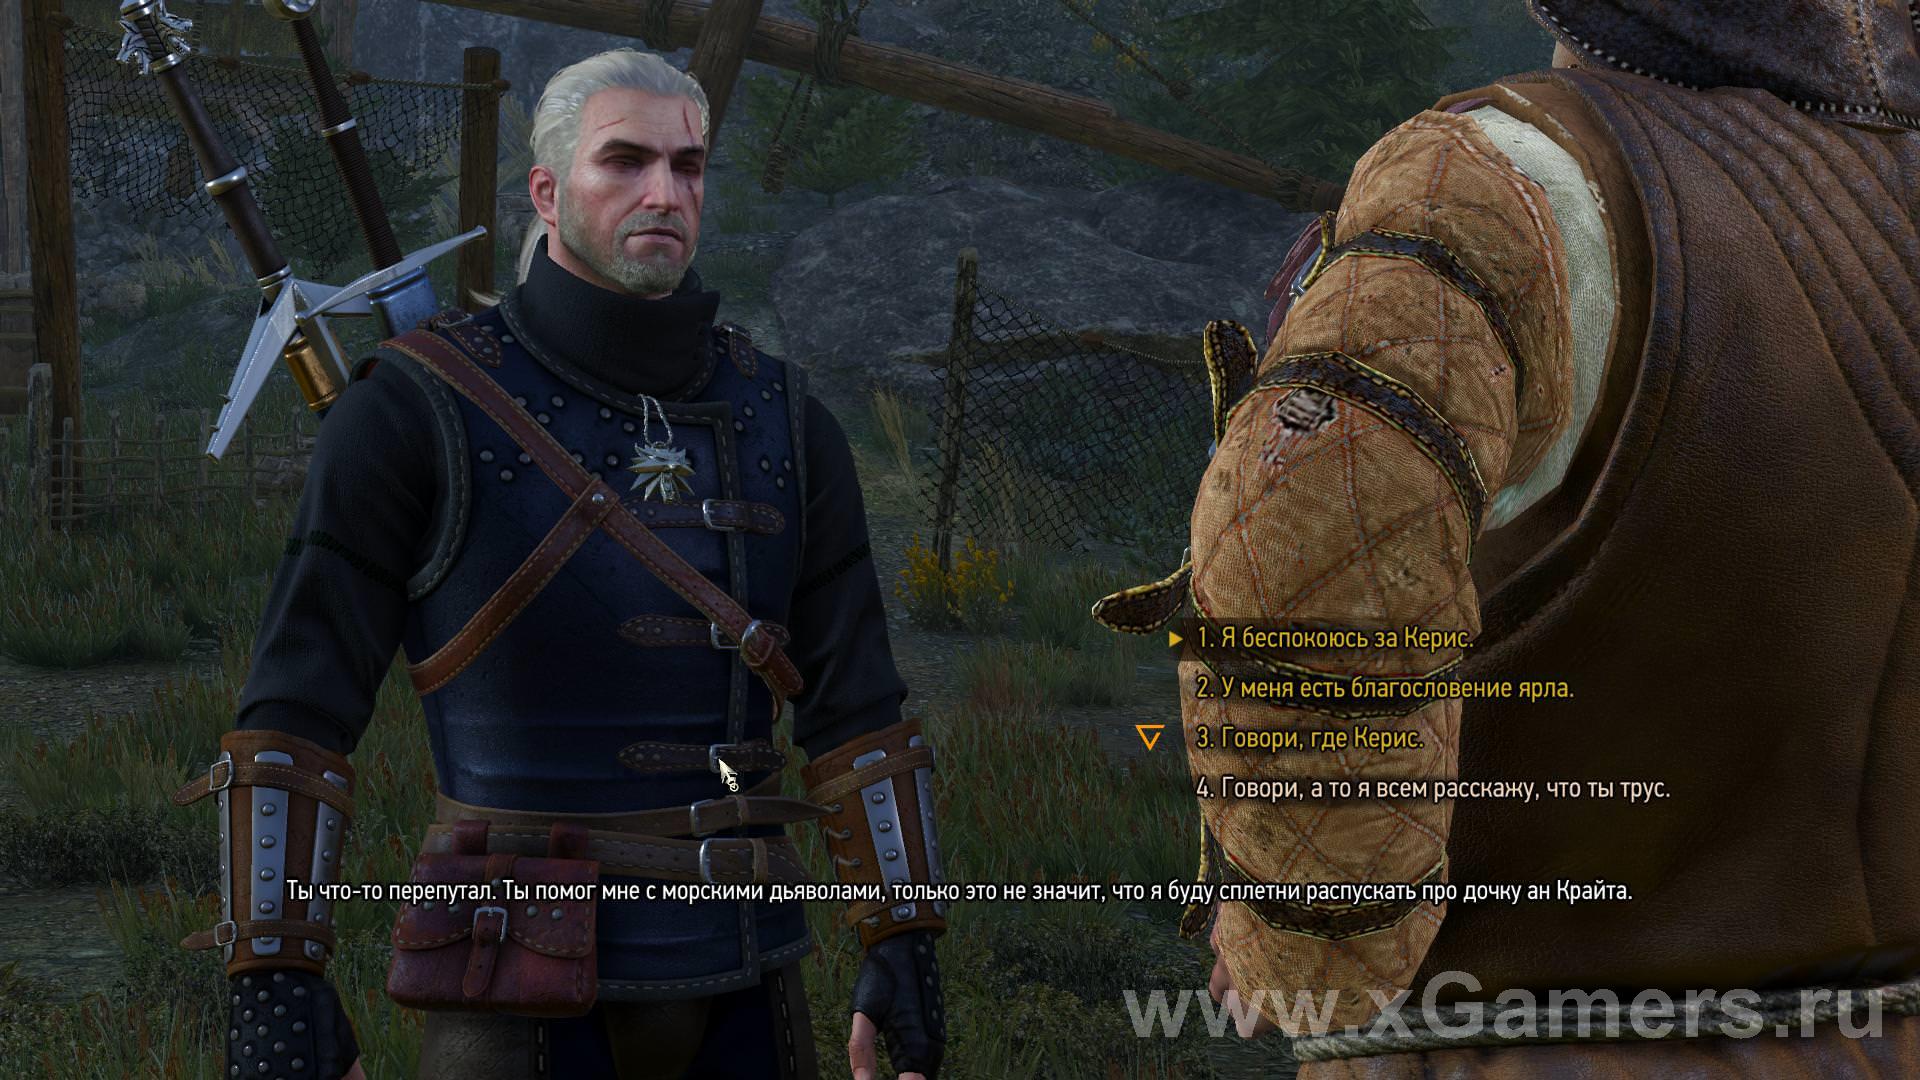 A conversation with a fisherman in the quest Jarl Udalrik